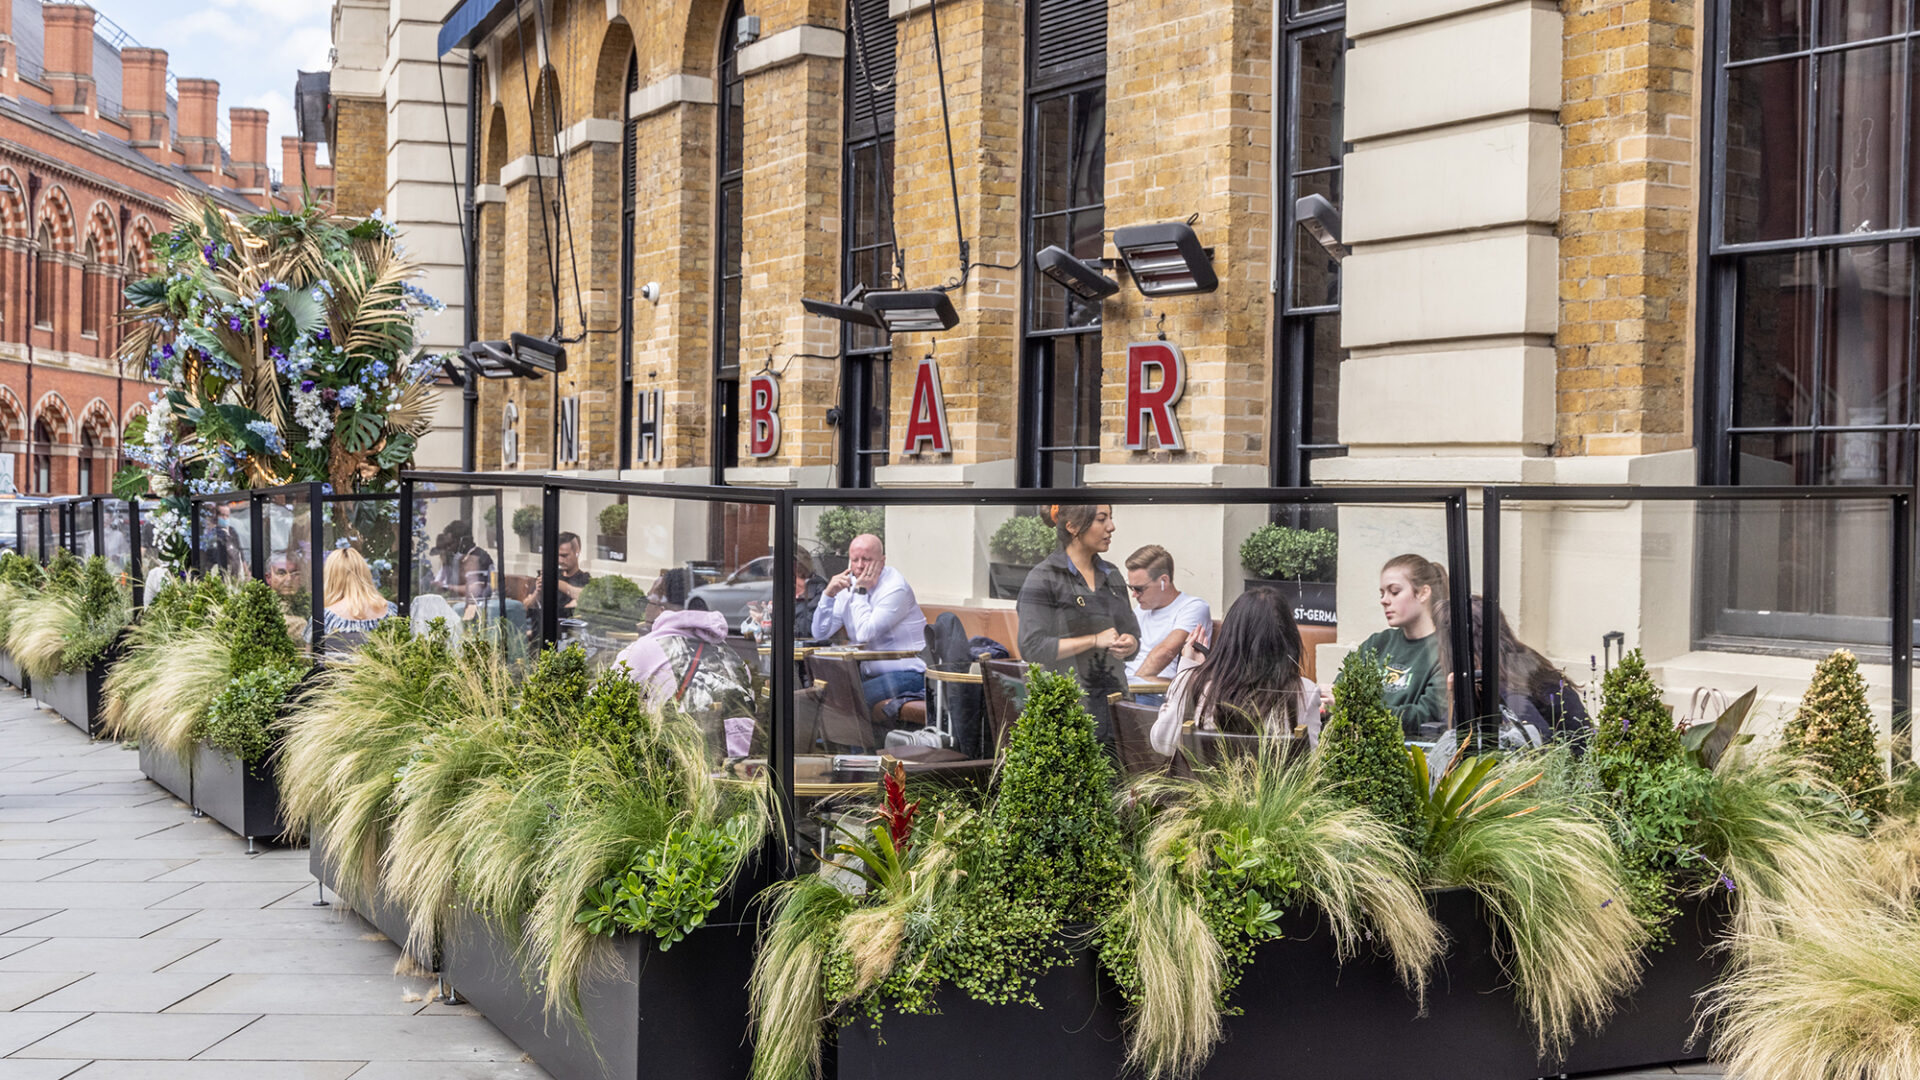 GNH Bar terrace, Great Northern Hotel, King's Cross